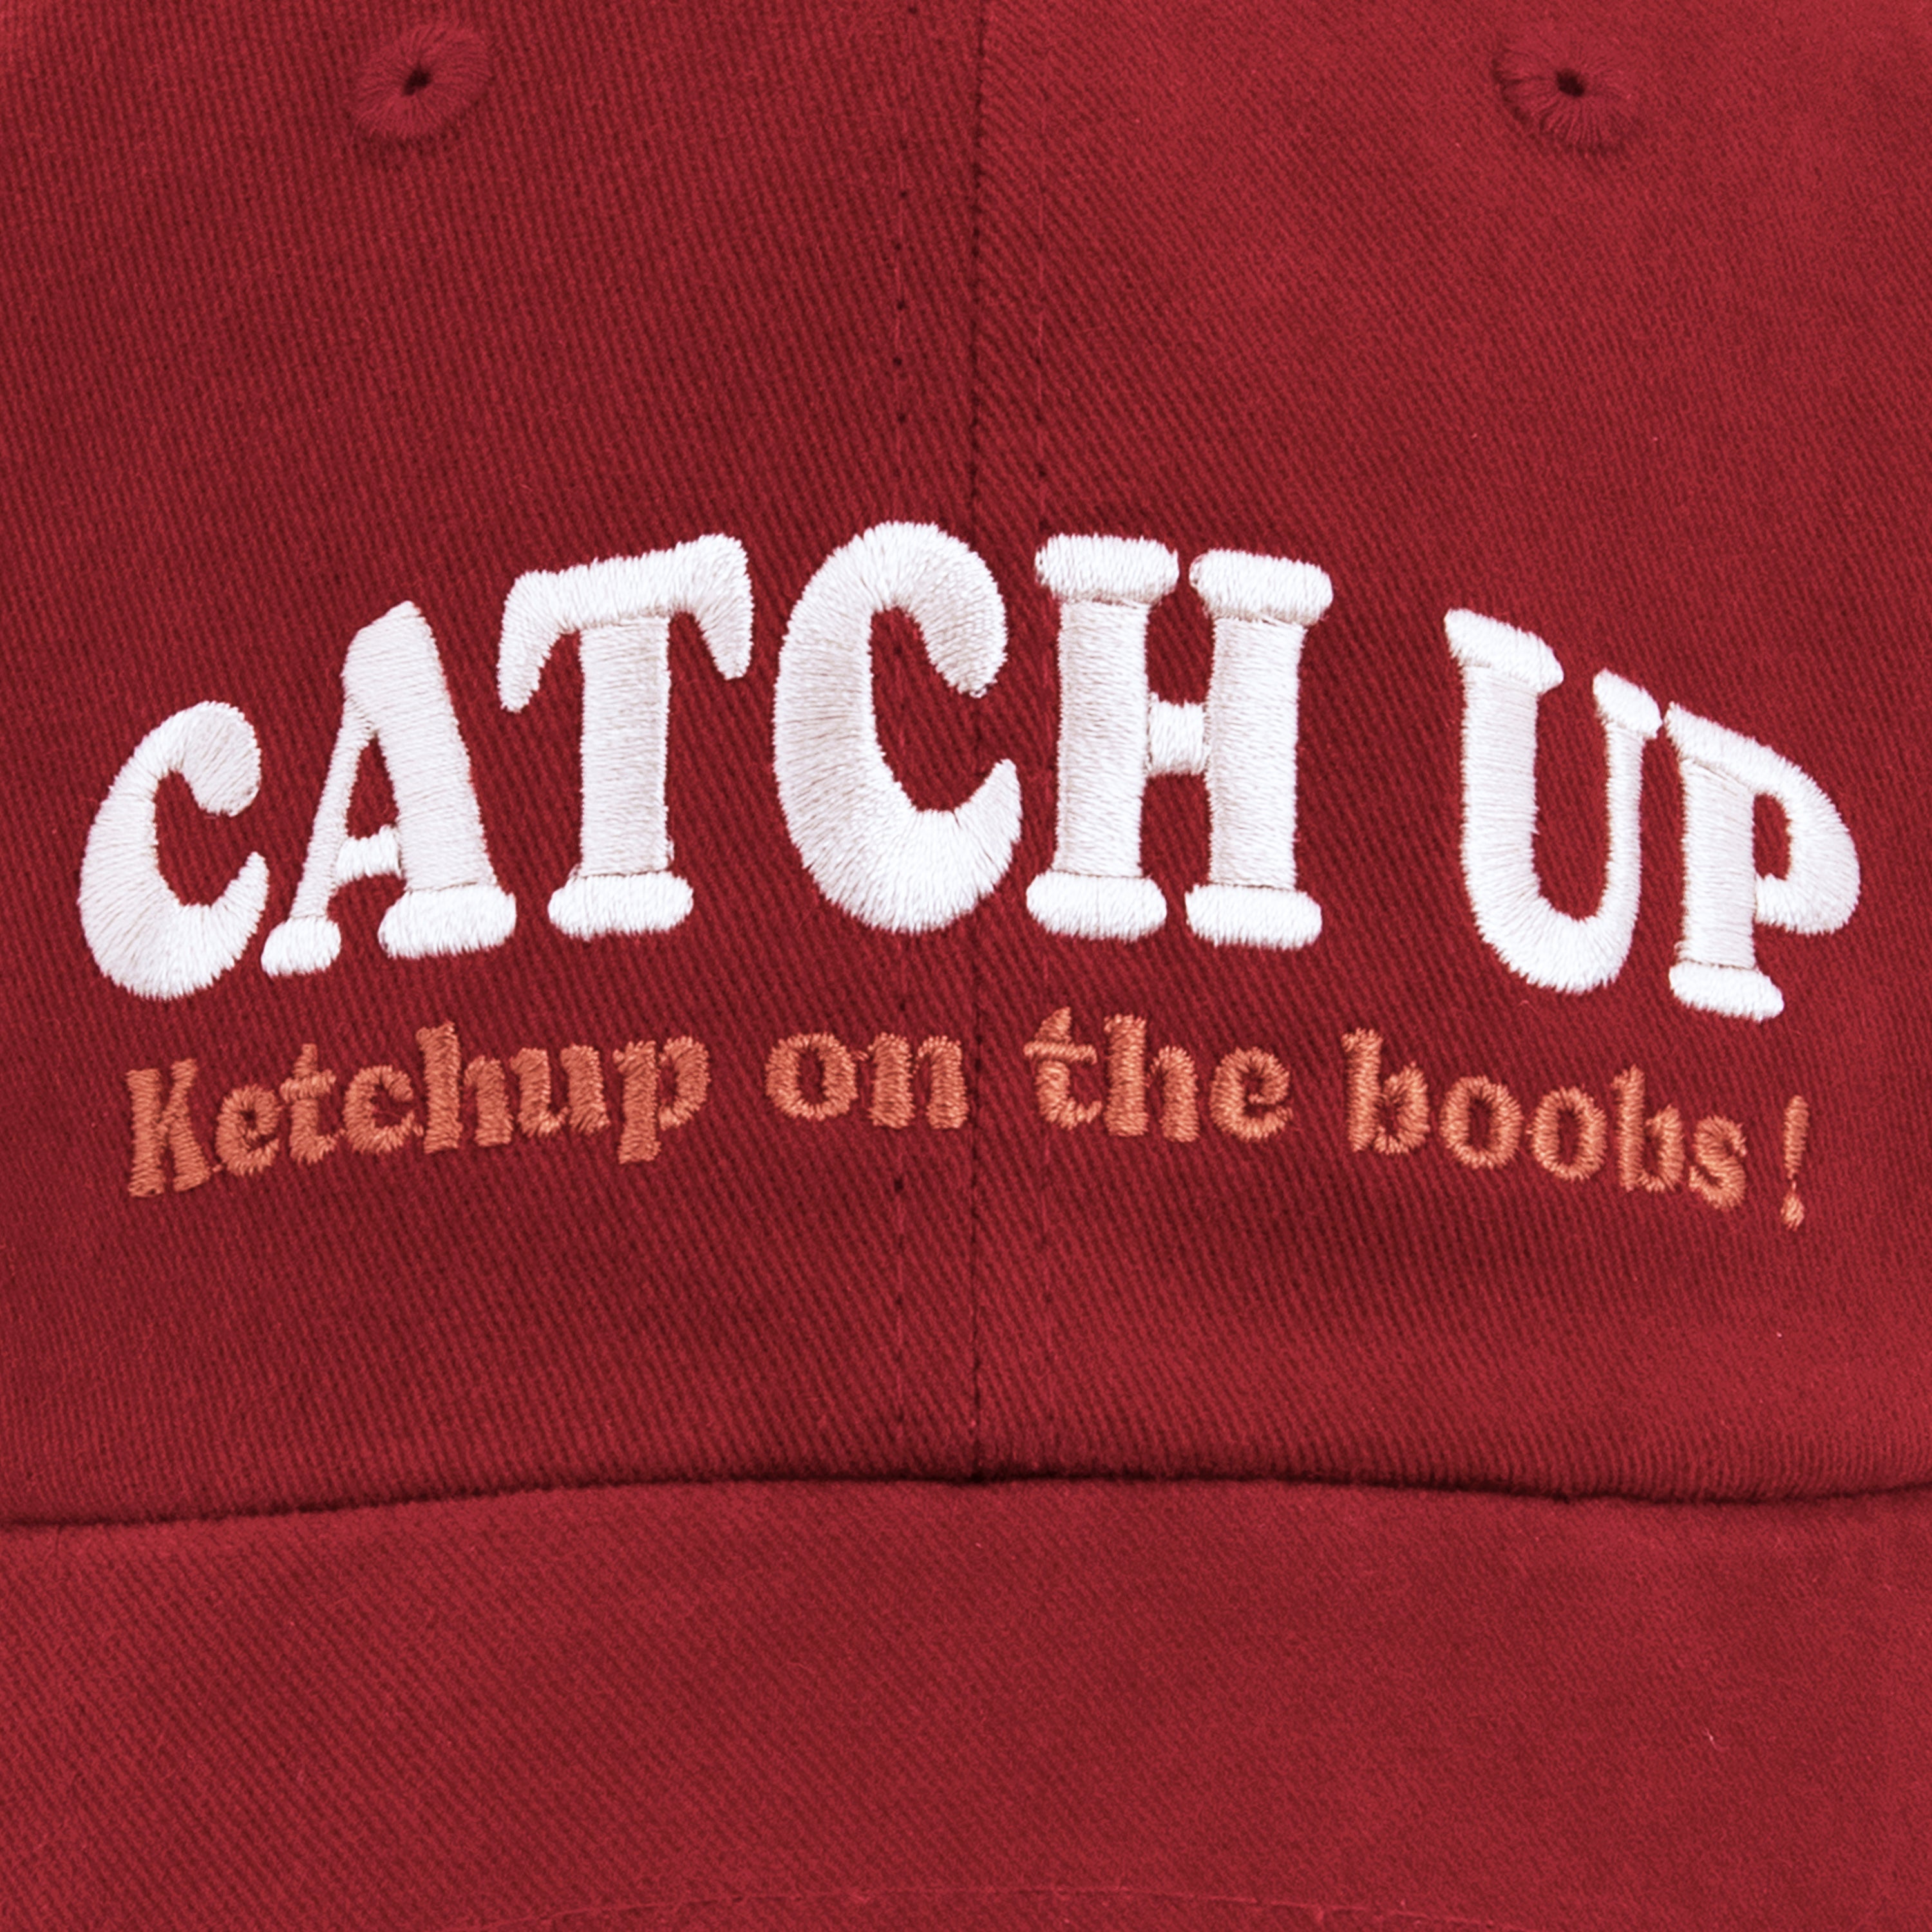 Catch-up ball cap - vintage red